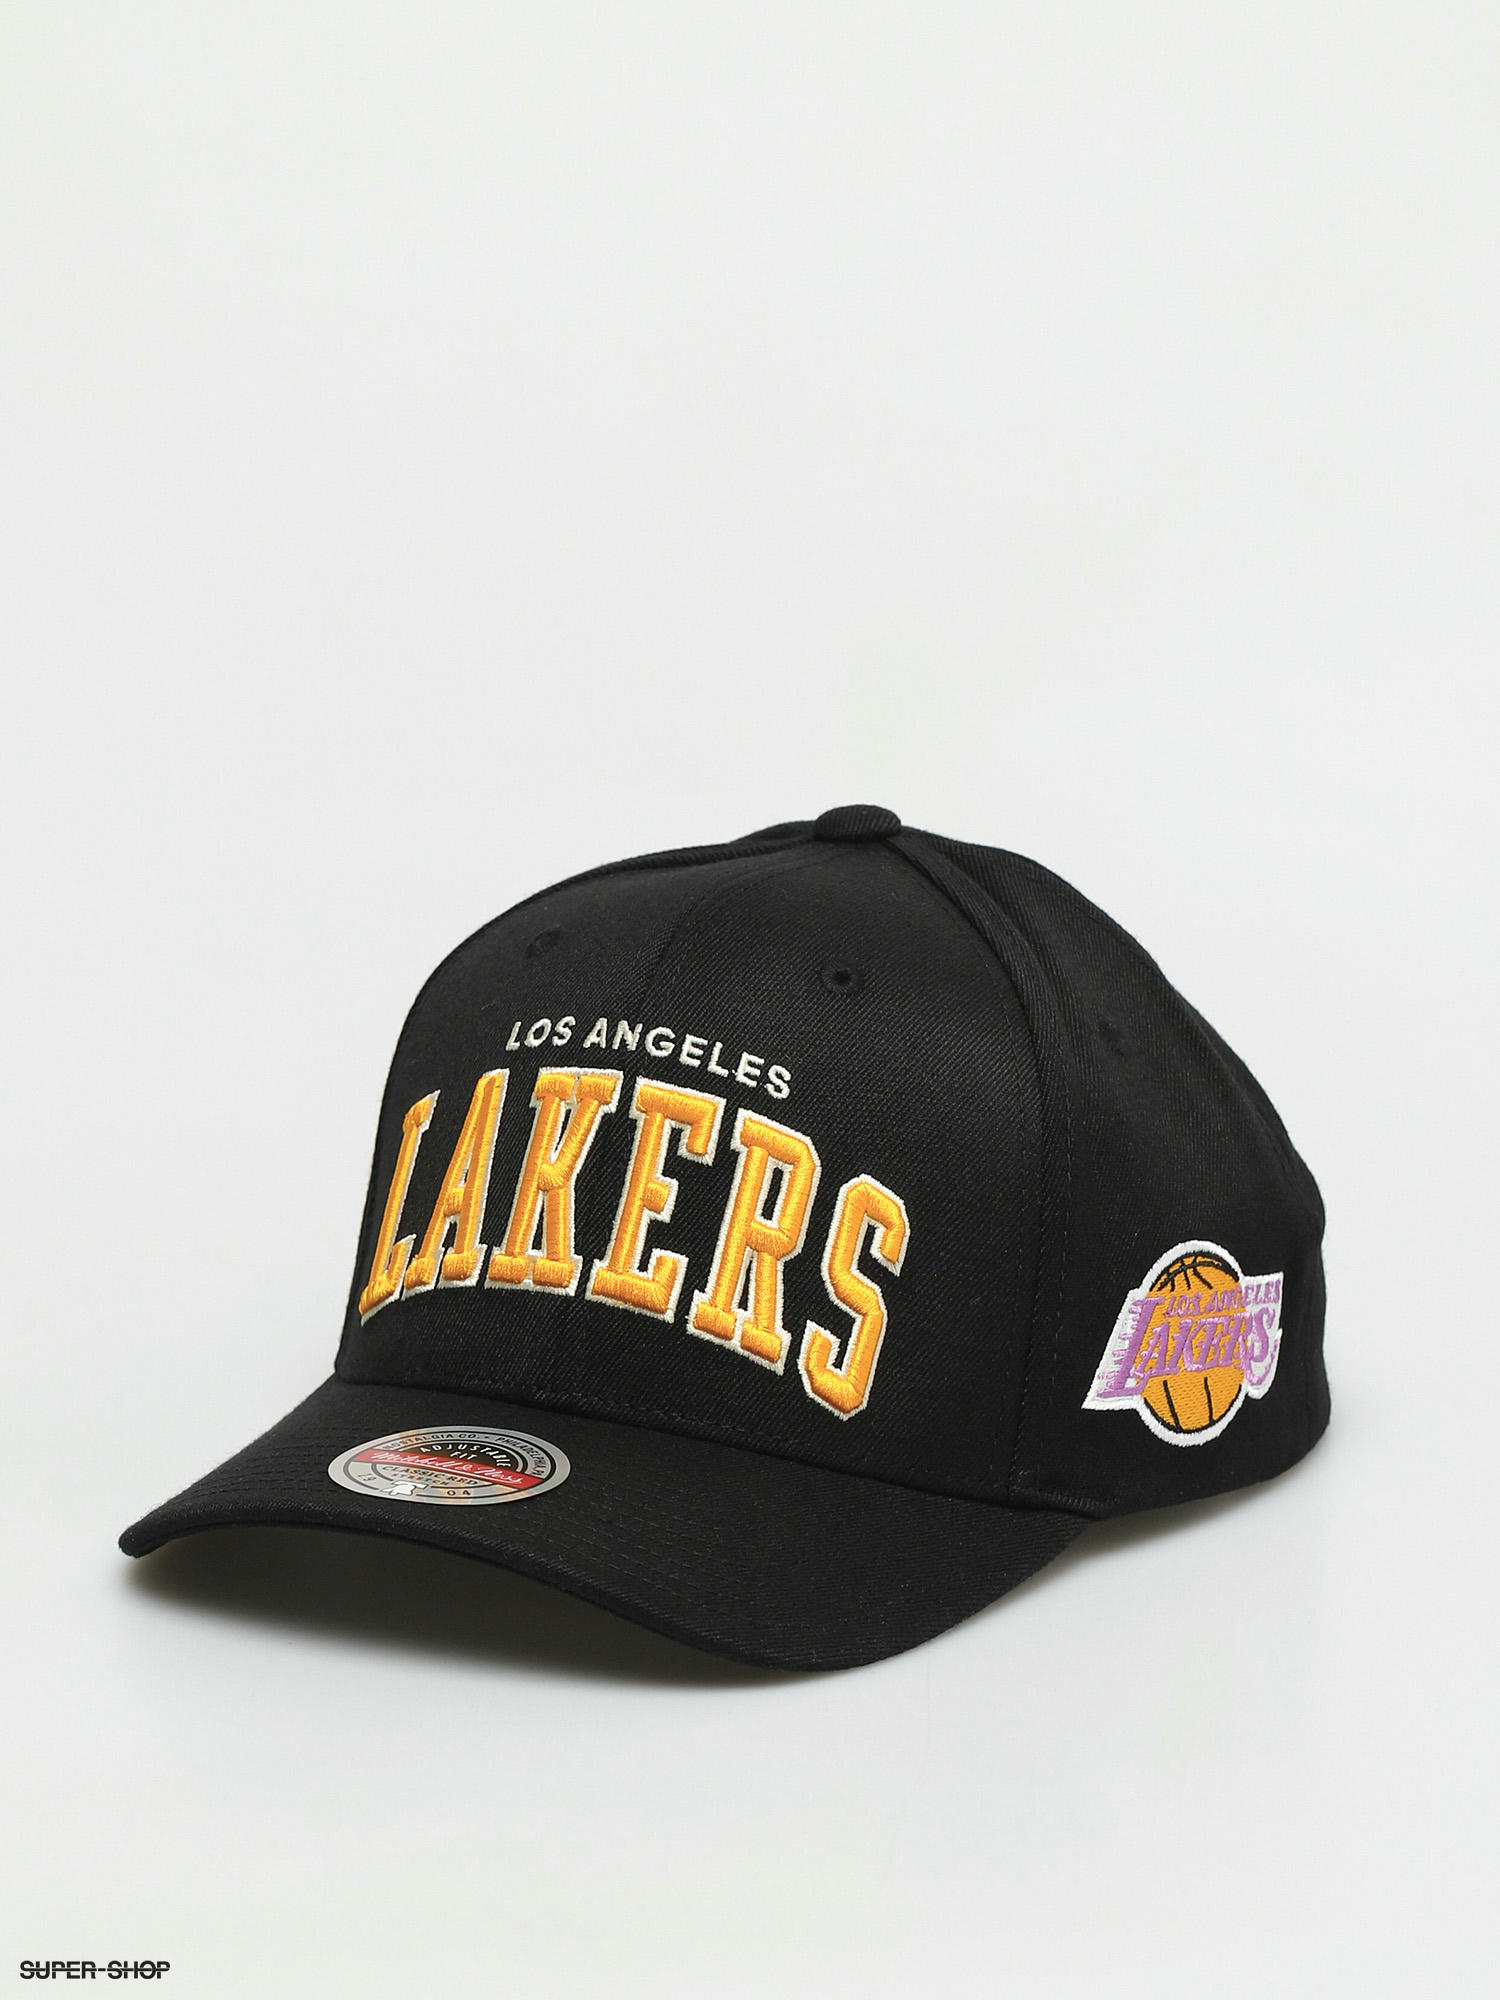 MITCHELL & NESS LOS ANGELES LAKERS BASEBALL CAP COLOR BLACK YELLOW